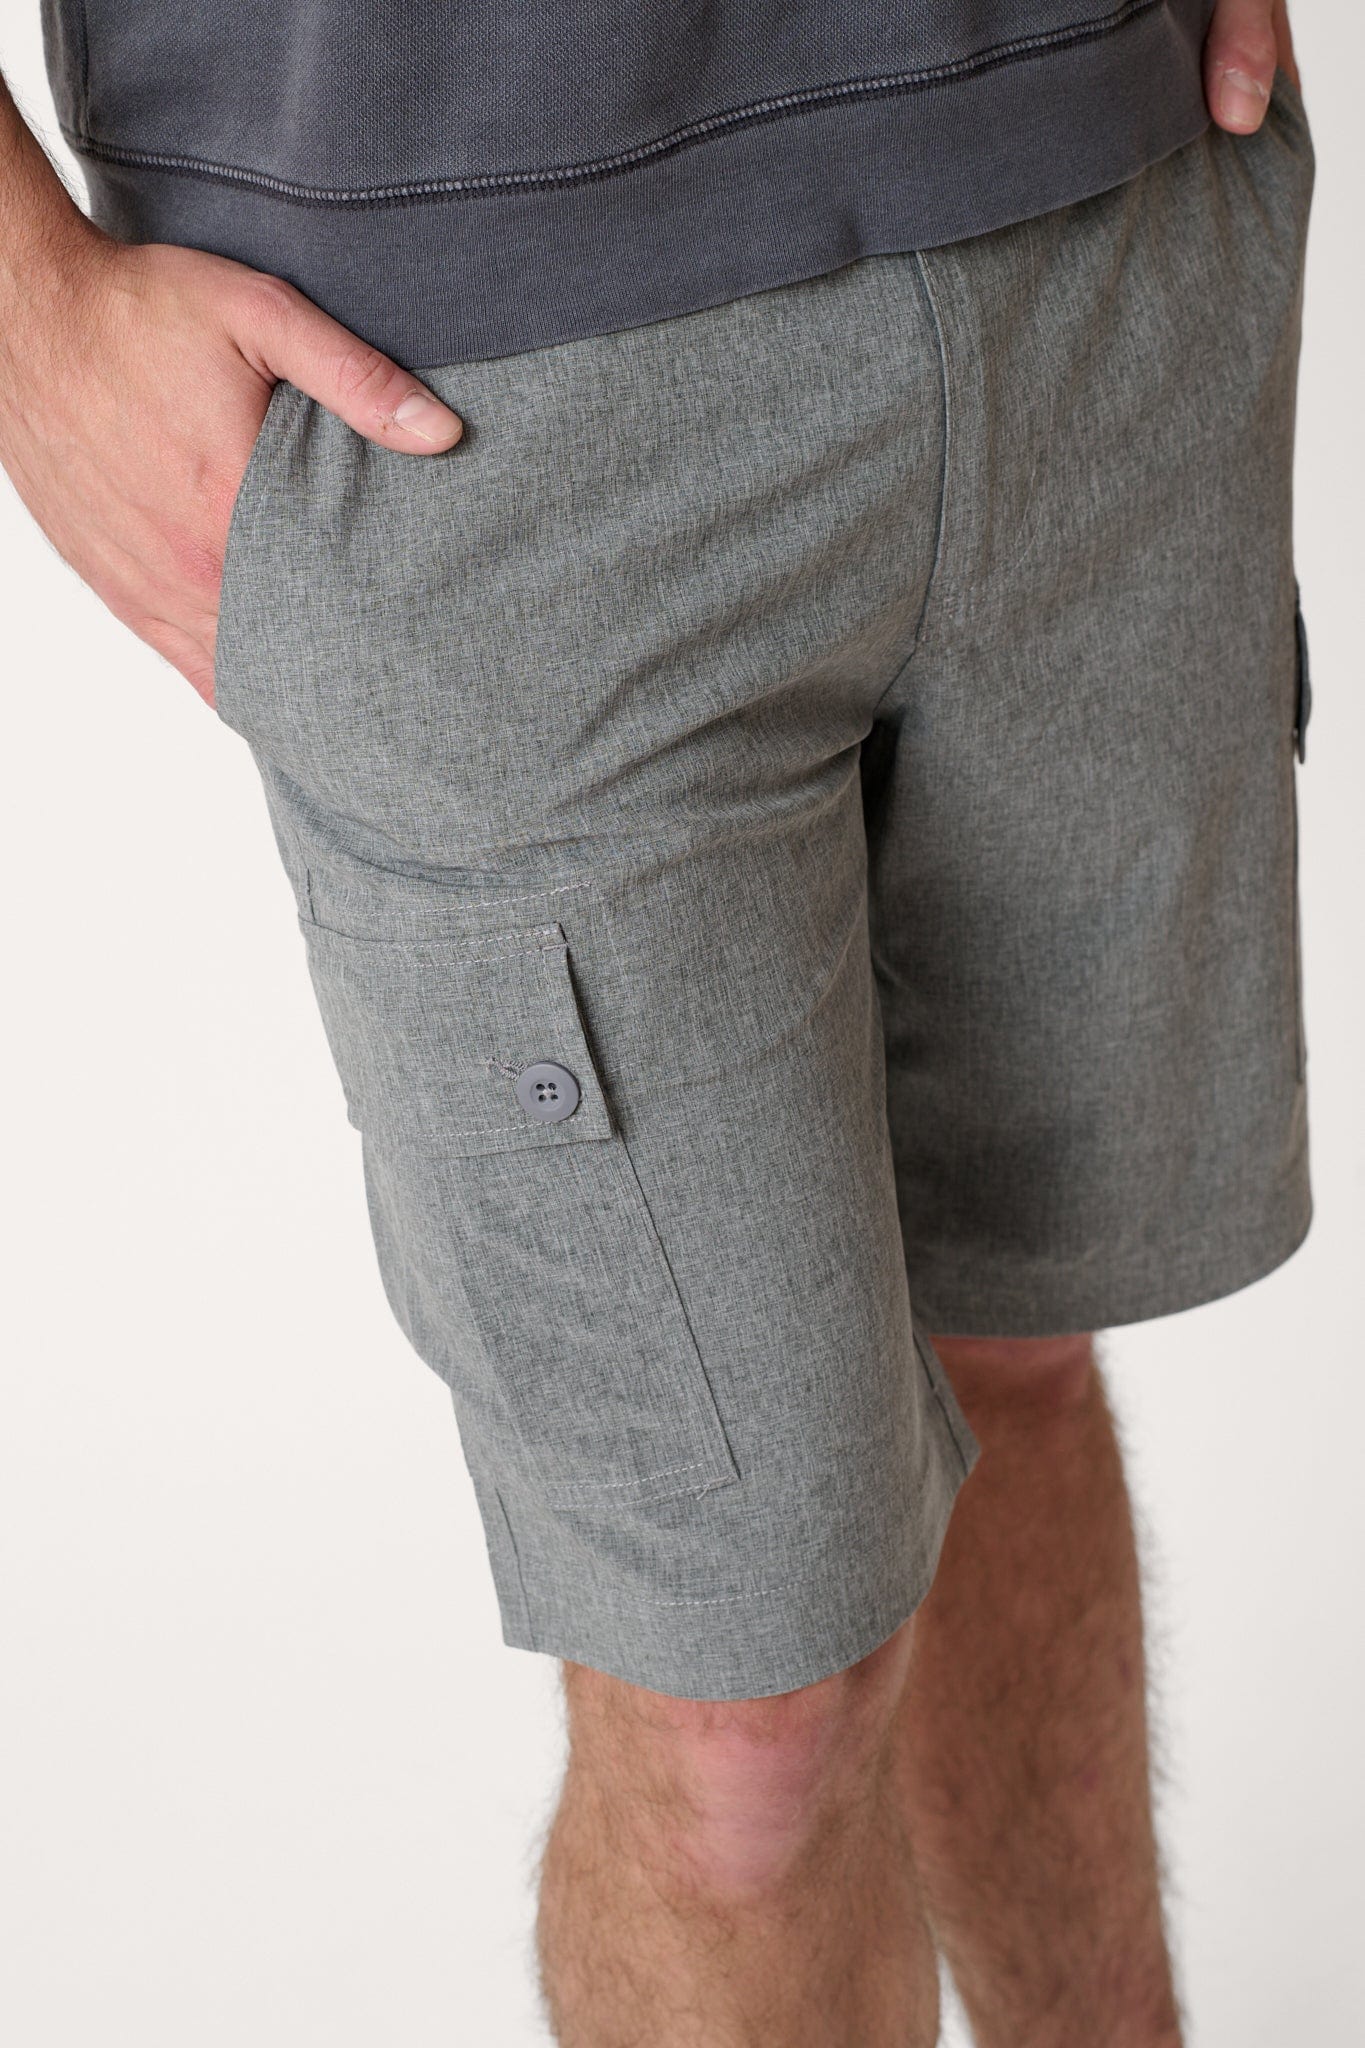 Male model dressed in hiking shorts for men with the WEARFIRST Go-To Short in Tap Shoe Heather